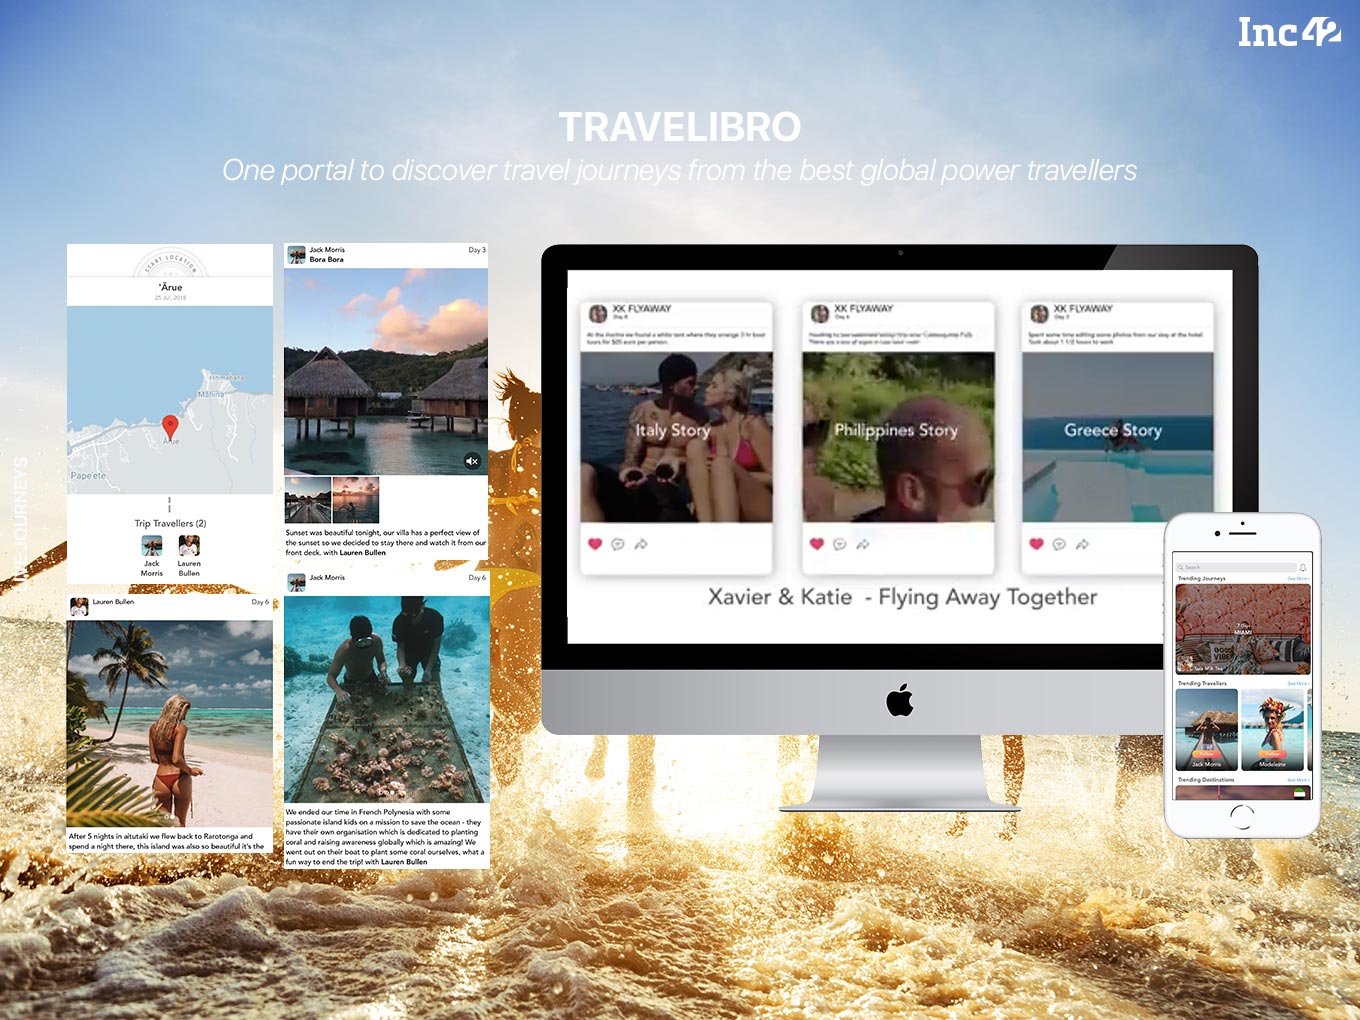 TraveLibro: Here’s A Travel Social Network That Helps Travellers Discover, Capture, And Inspire Wanderlust